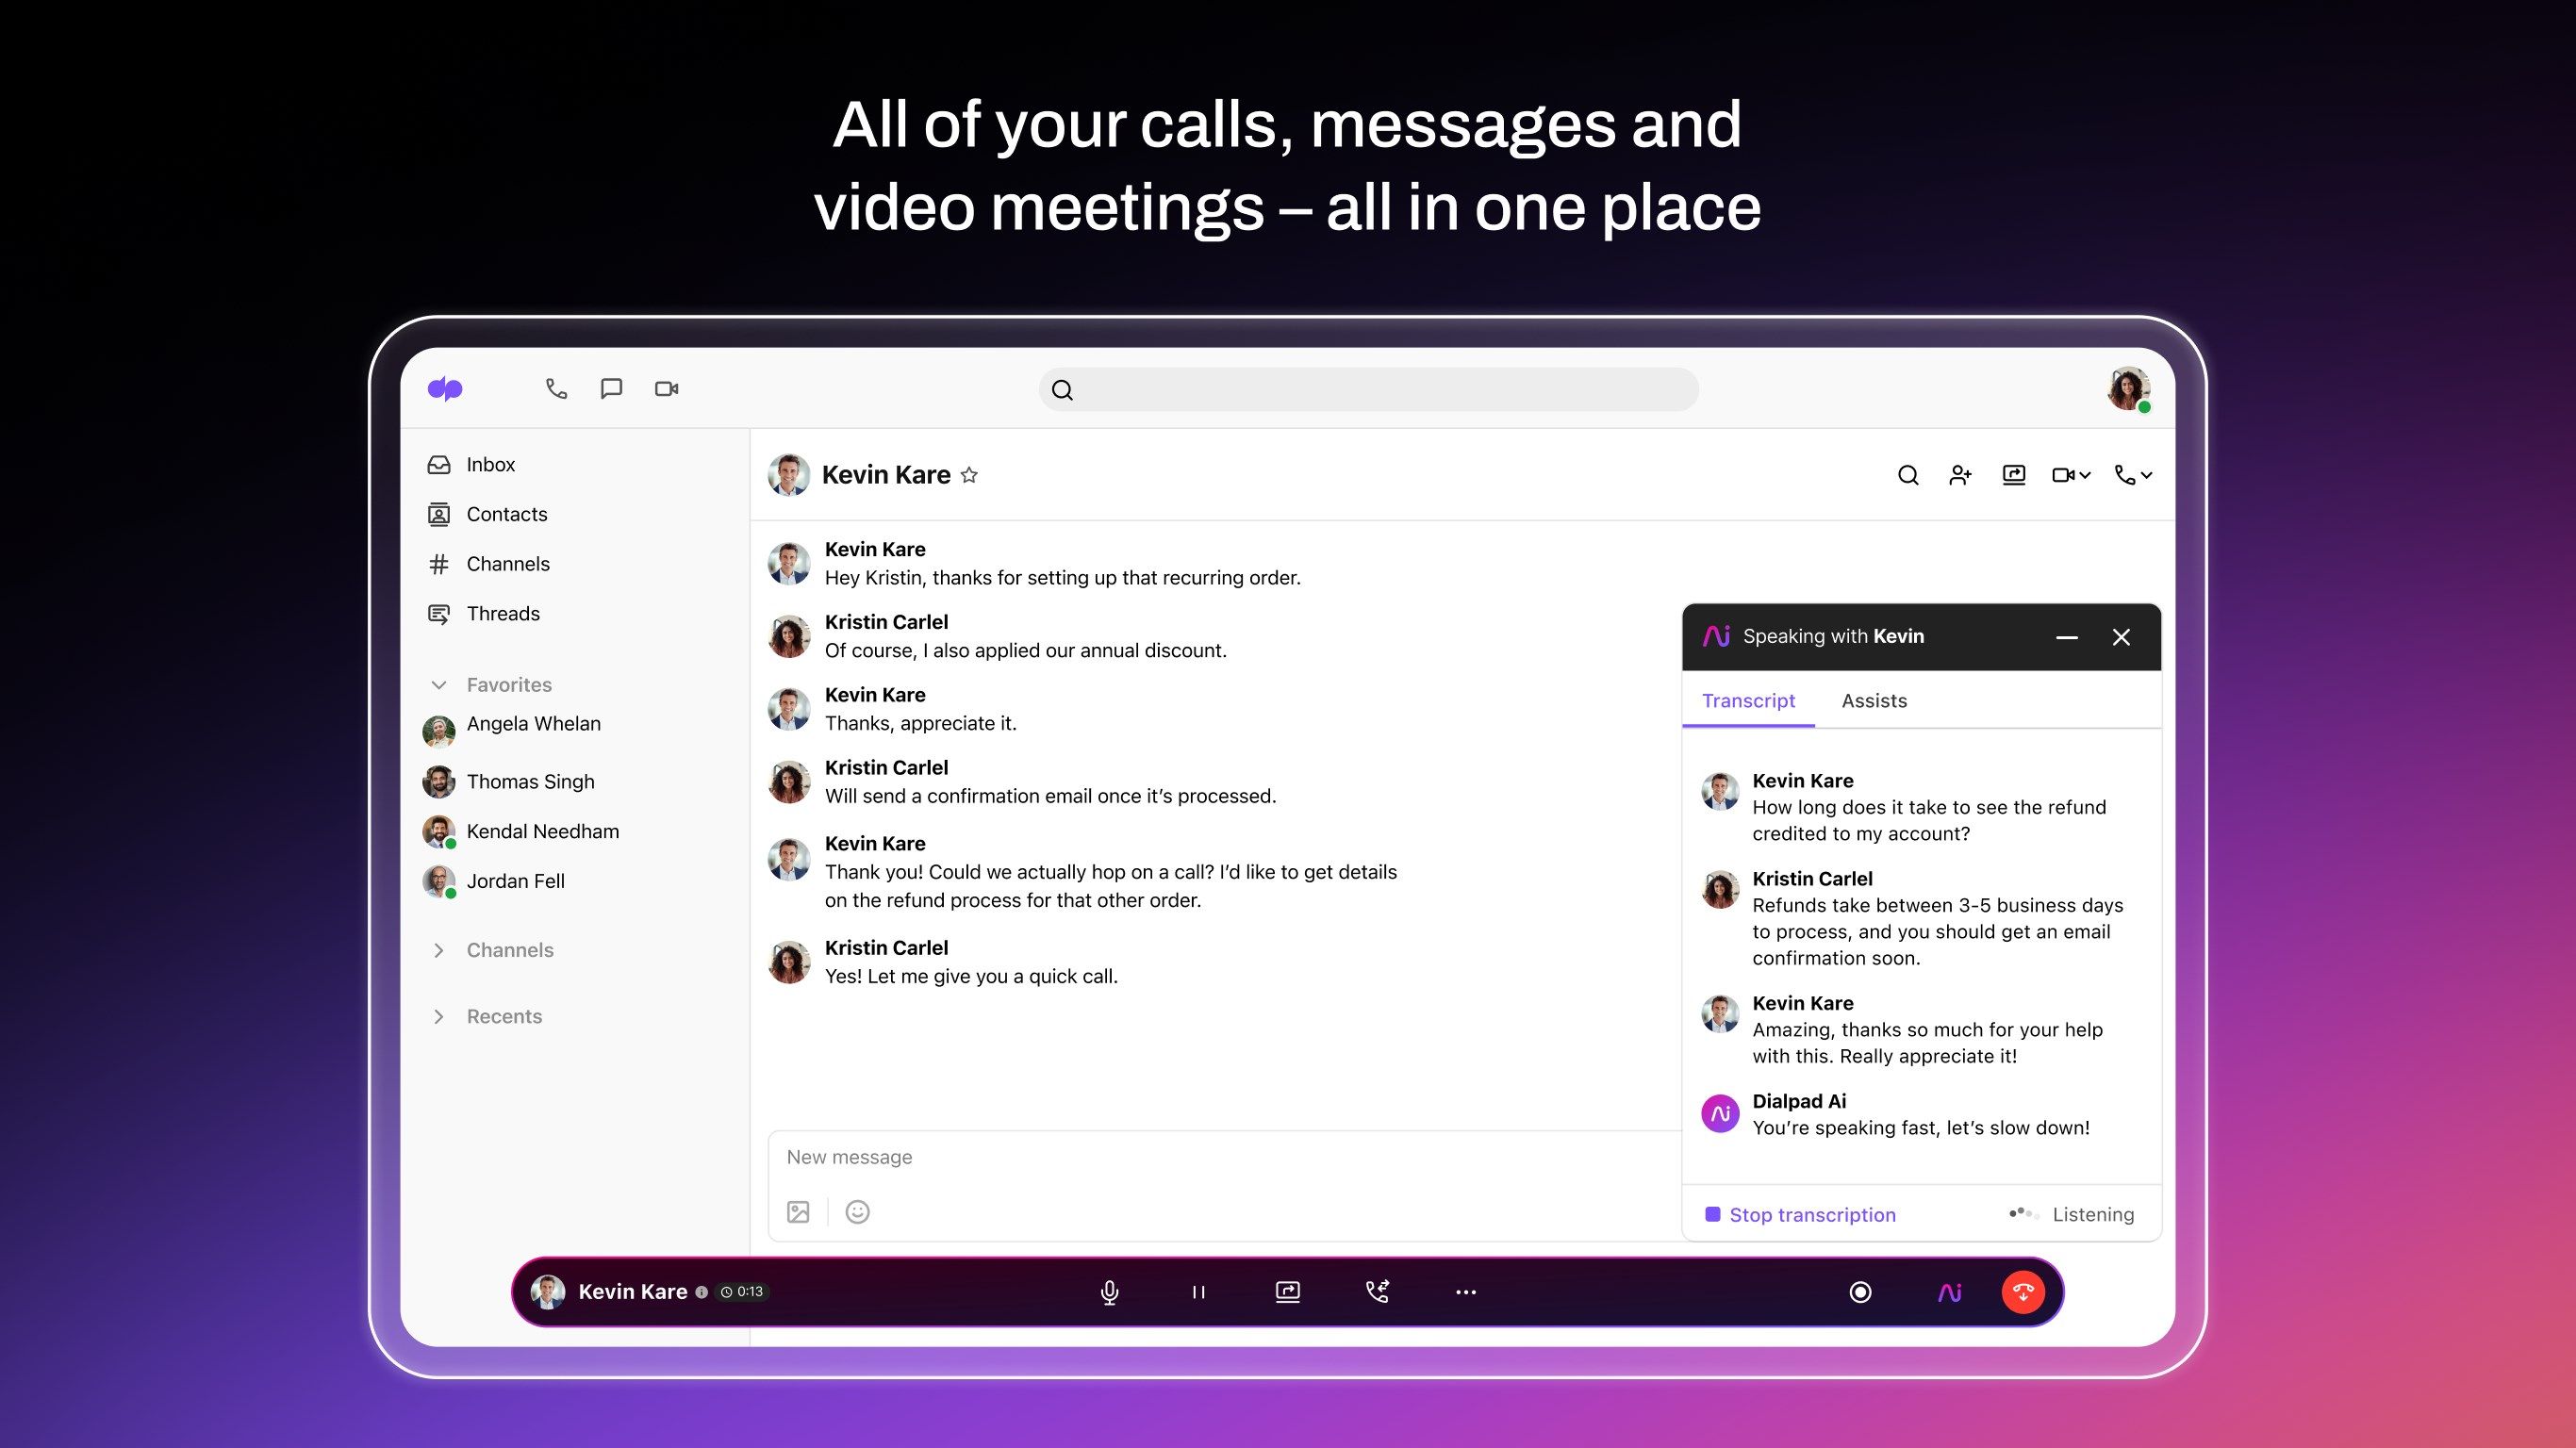 All of your calls, messages and video meetings – all in one place